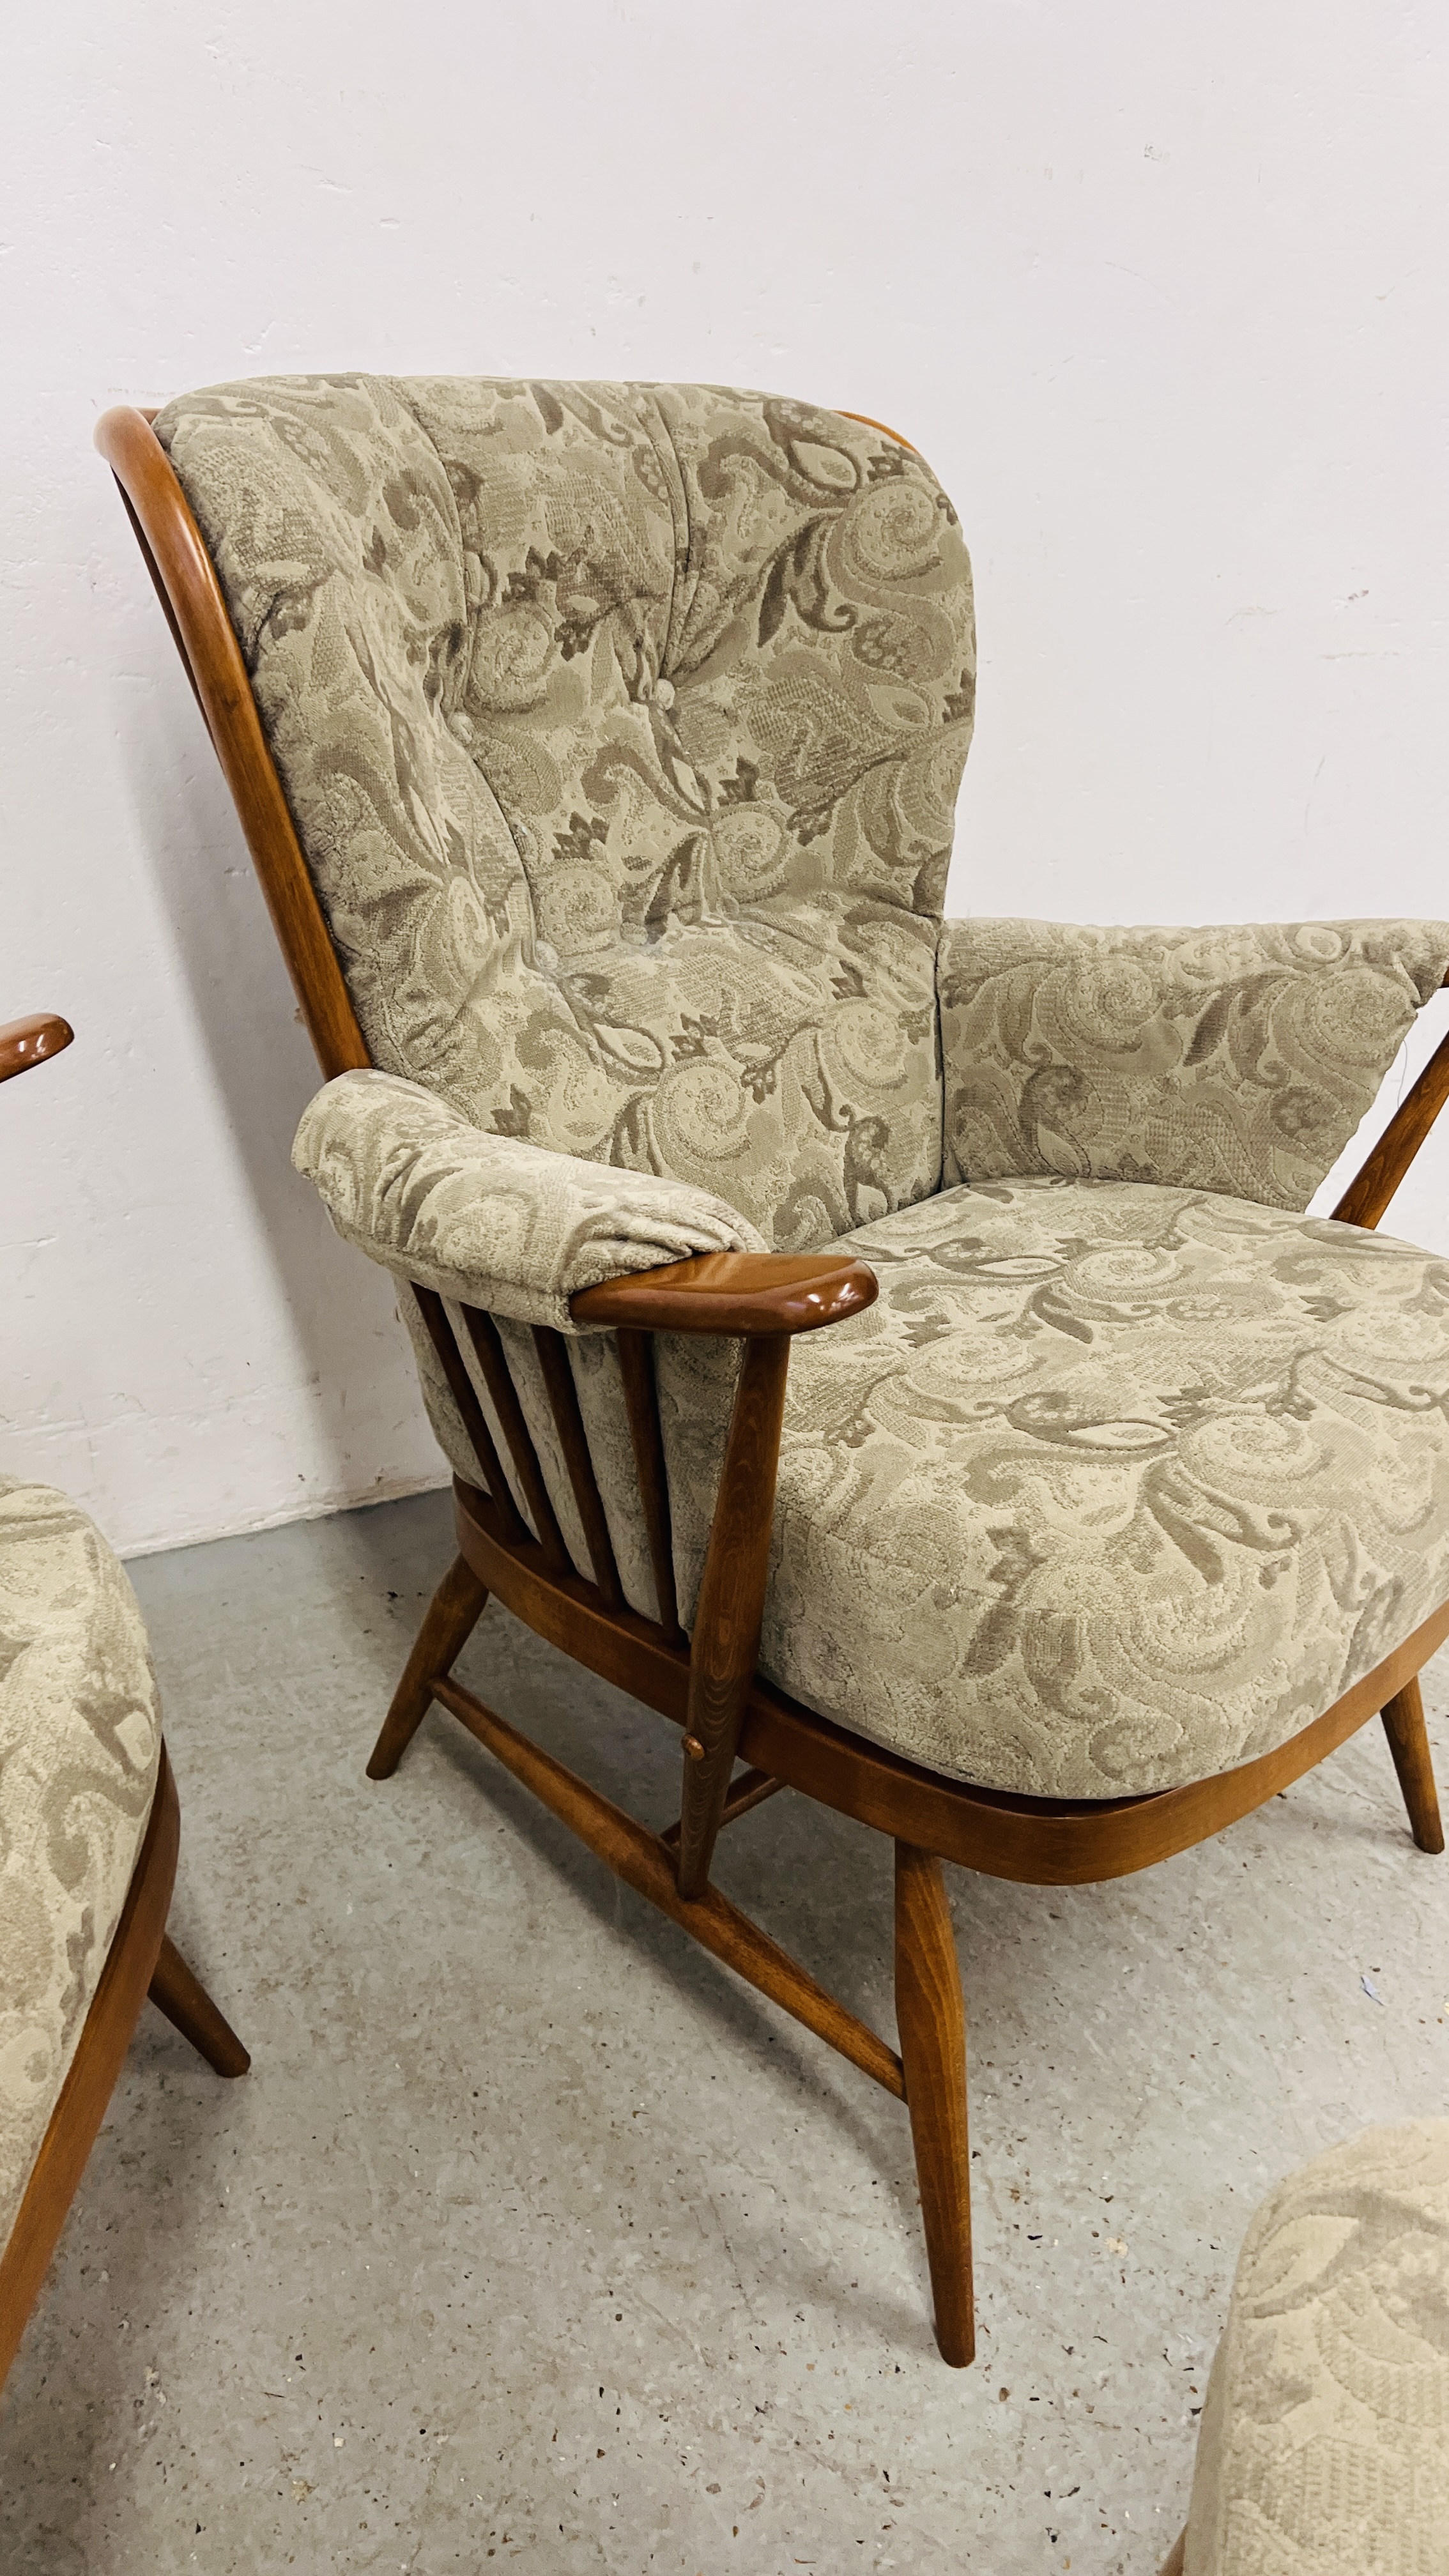 AN ERCOL "GOLDEN DAWN" FINISH COTTAGE THREE PIECE LOUNGE SUITE WITH MATCHING FOOTSTOOL - TRADE ONLY. - Image 9 of 11